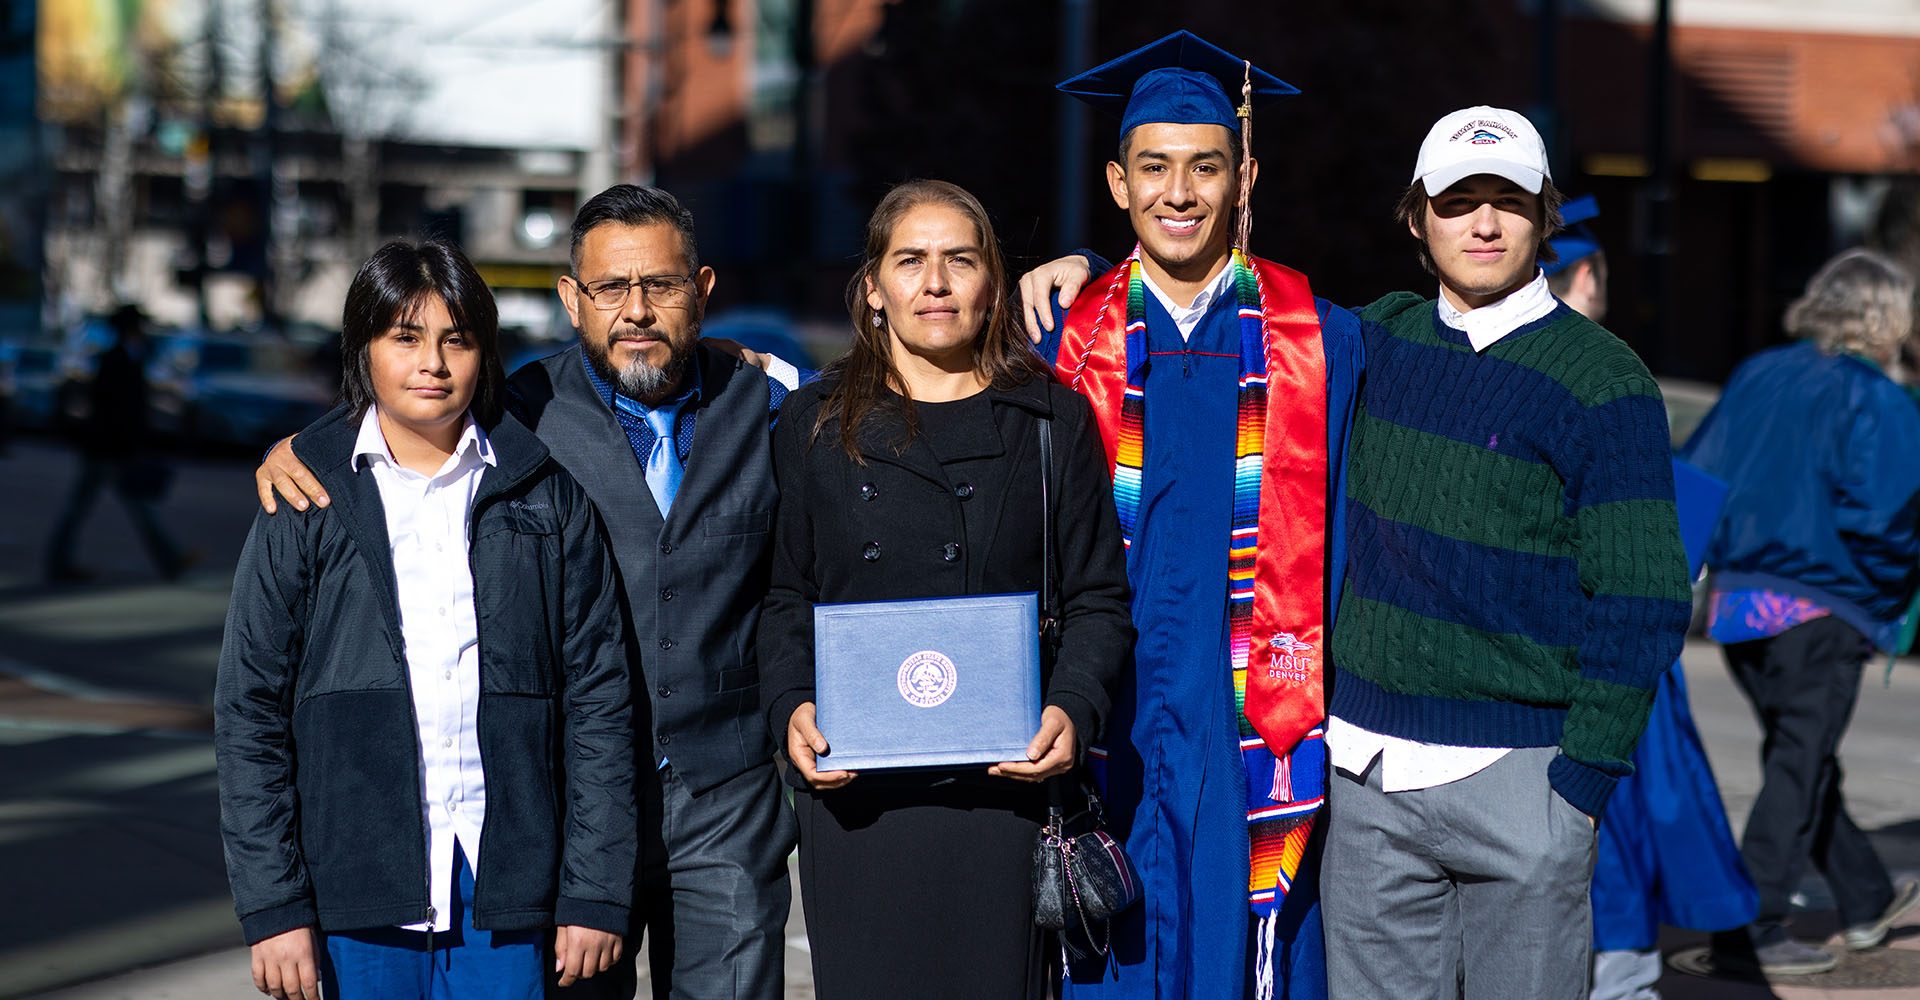 MSU Denver graduate poses with his family in Downtown Denver.